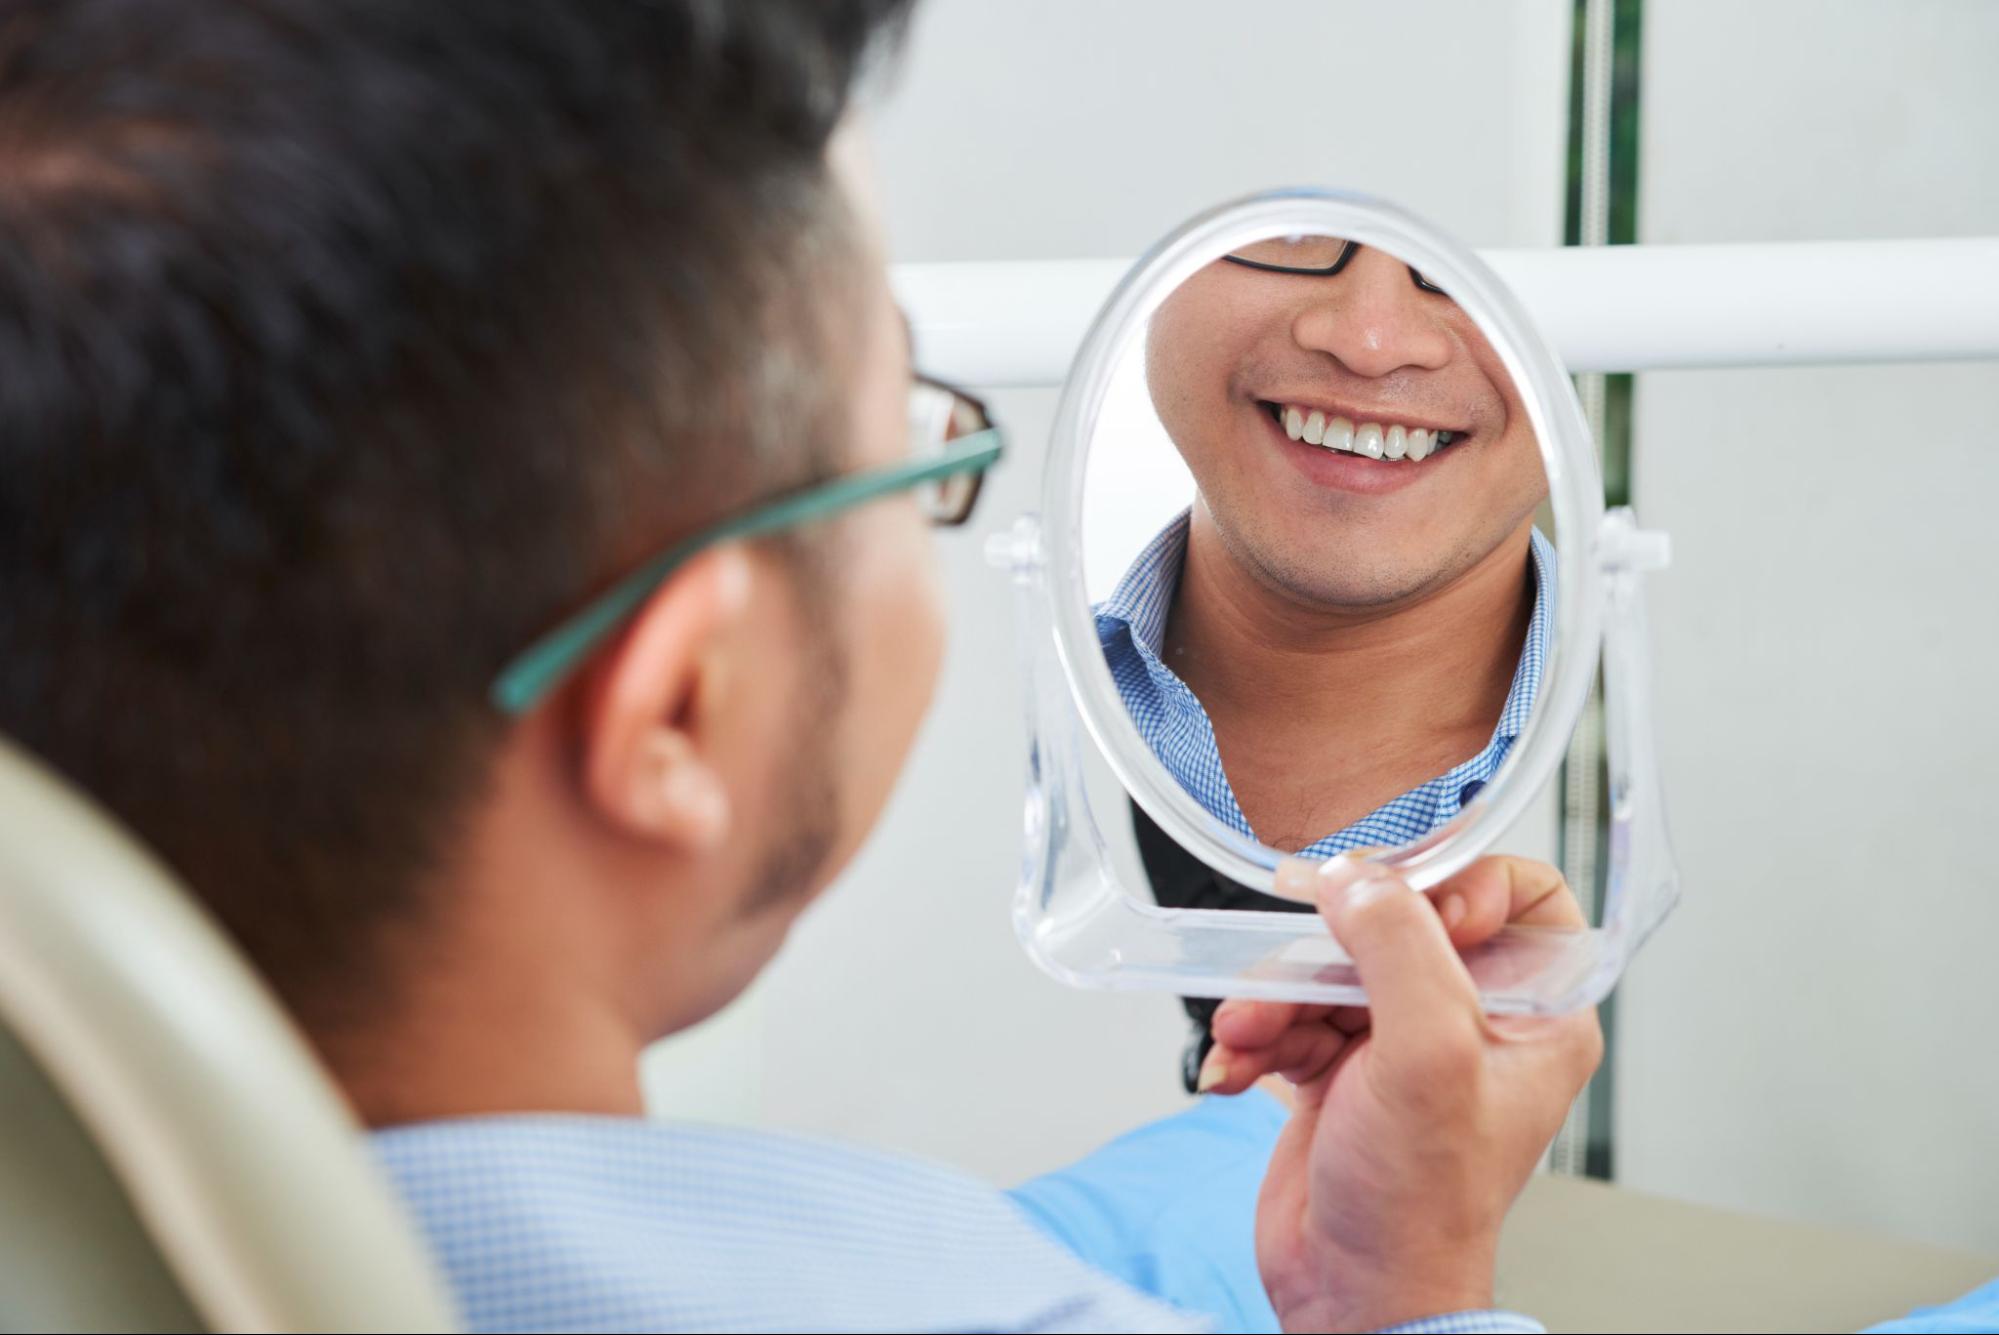 patient at dentist checking his teeth in the mirror